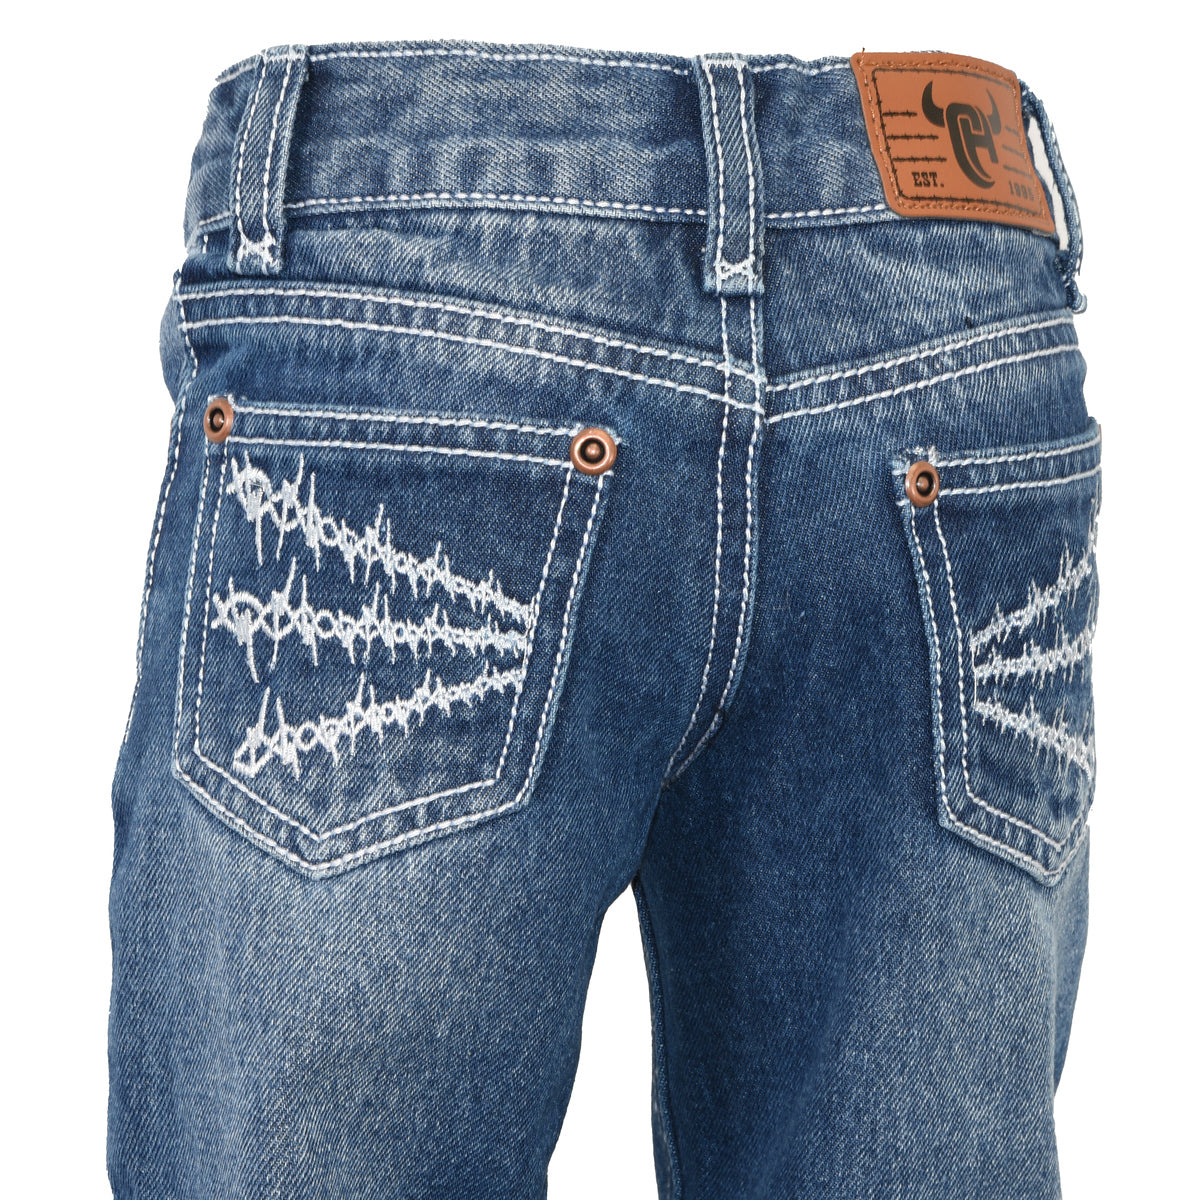 Cowboy Hardware Youth Boy's Barbed Wire Pocket Jeans